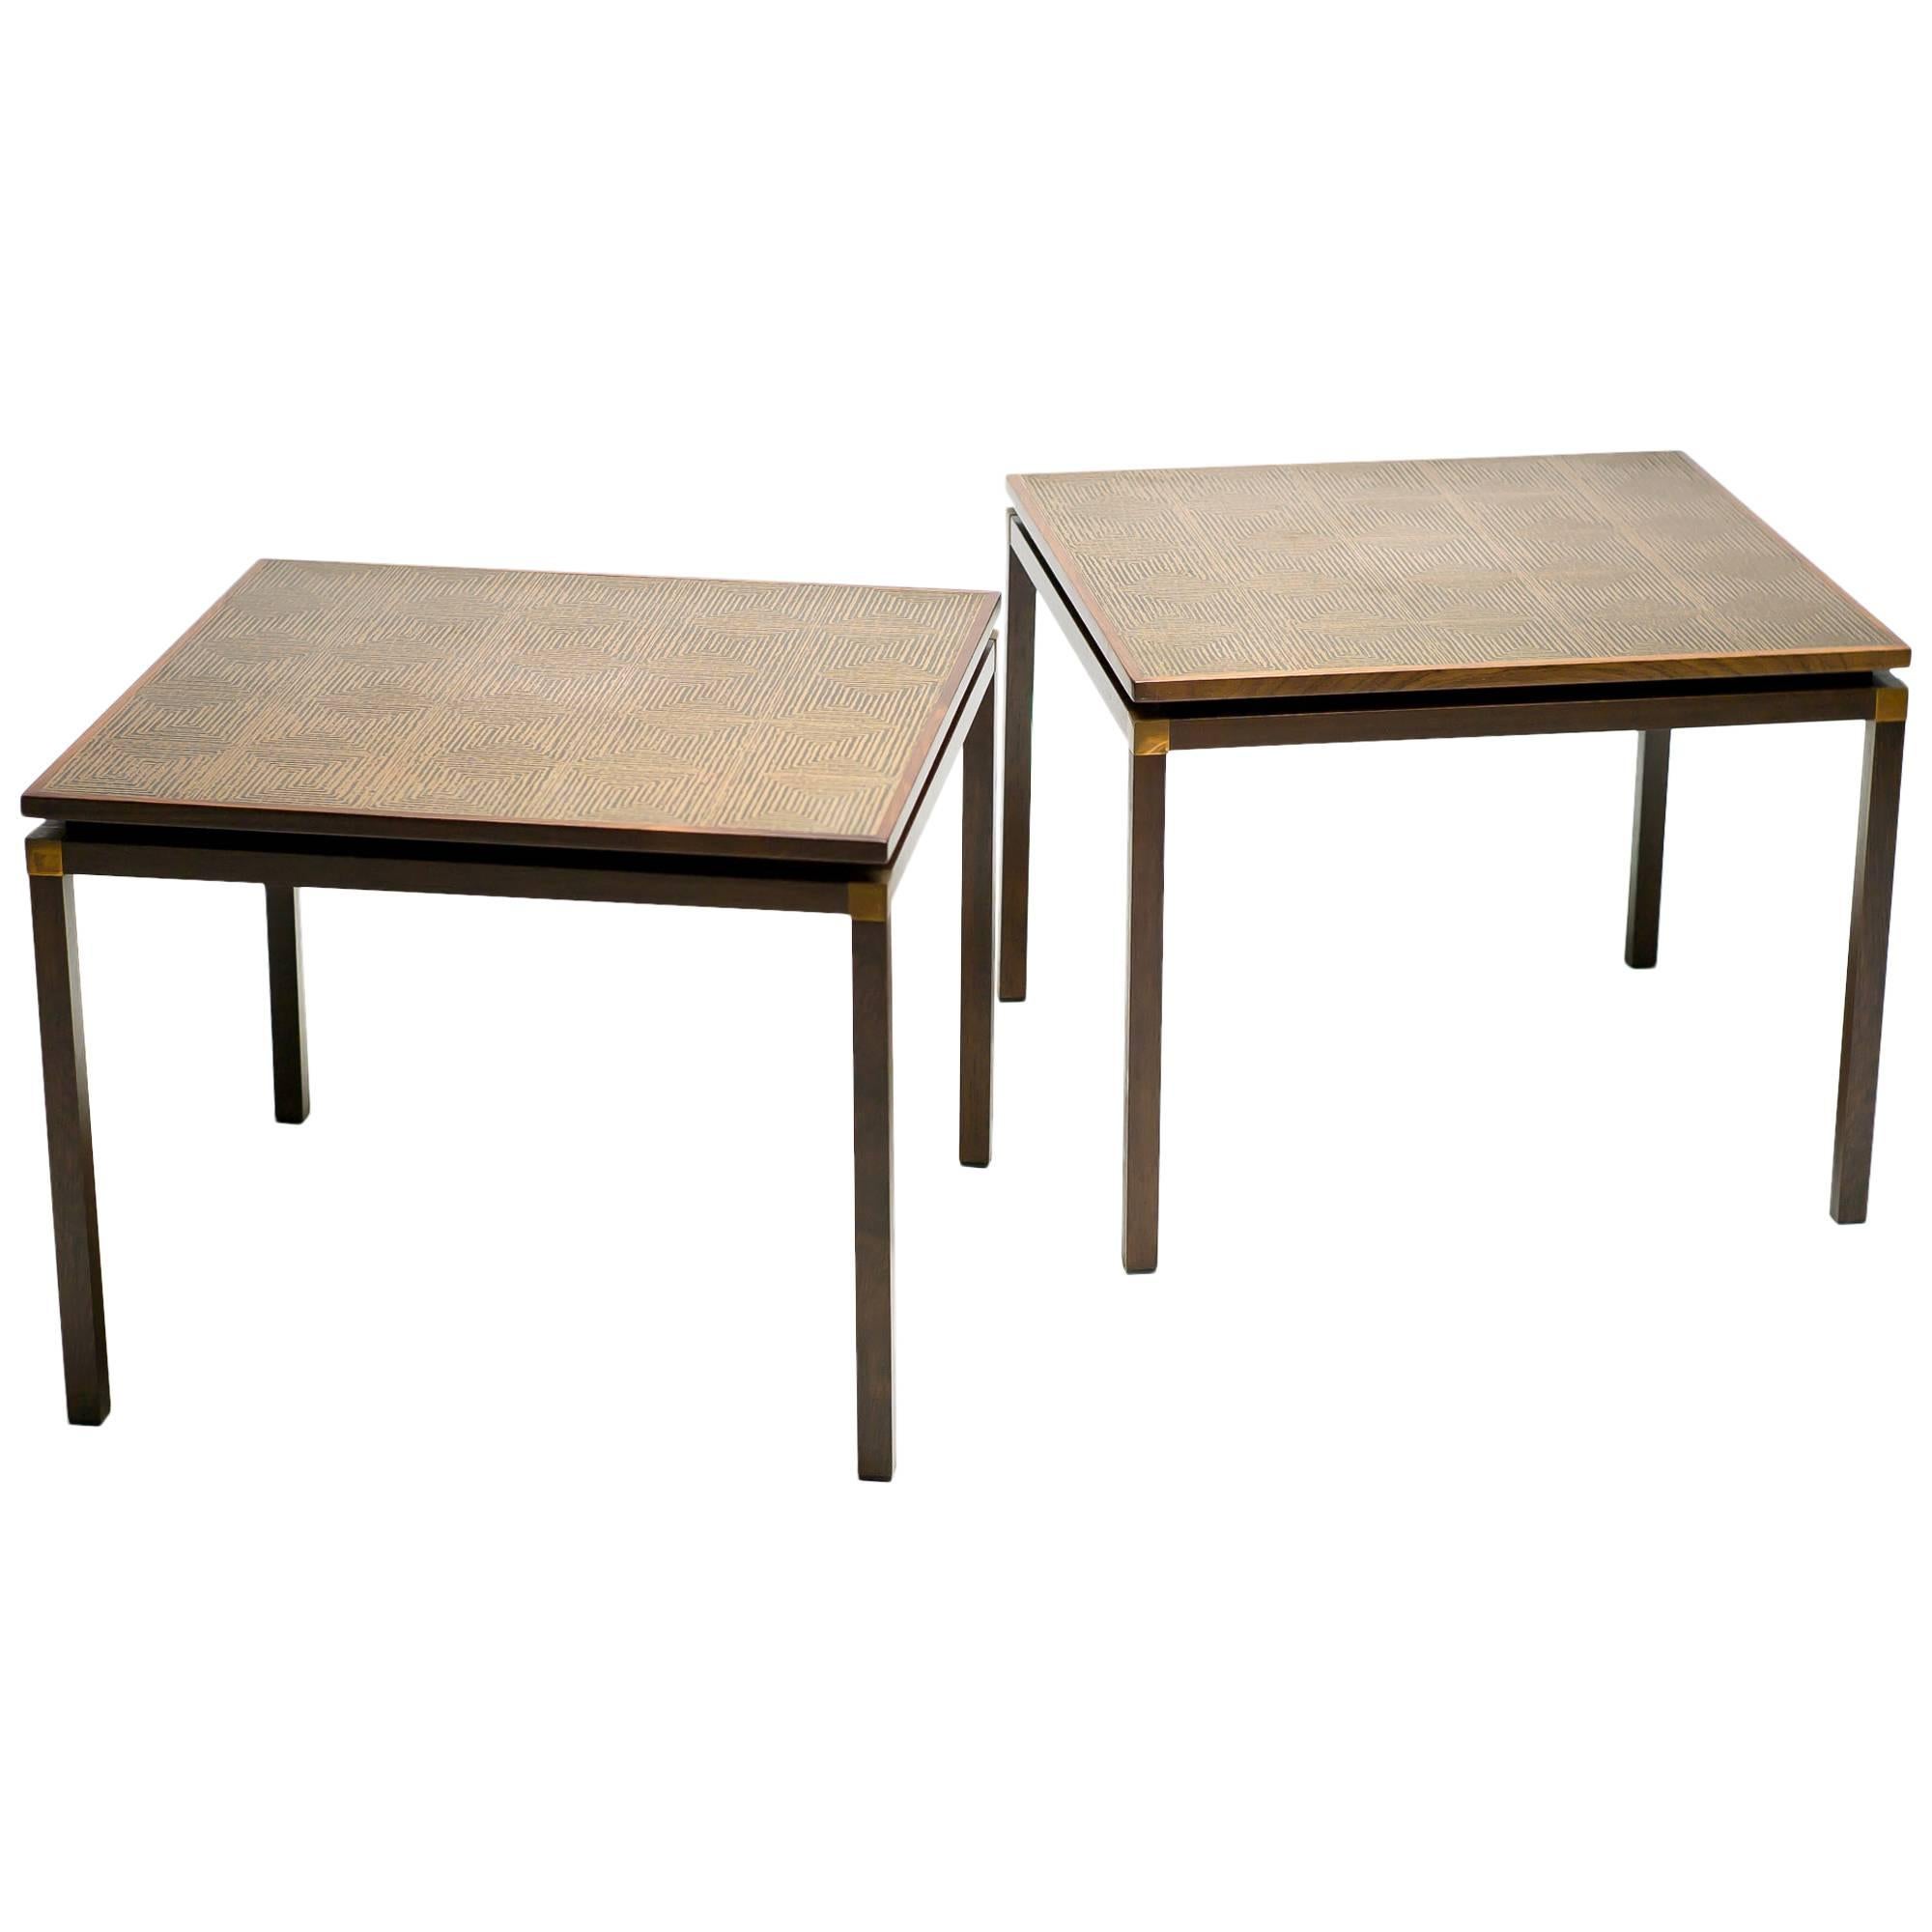 Pair of Embossed Copper Side Tables, Denmark, circa 1960